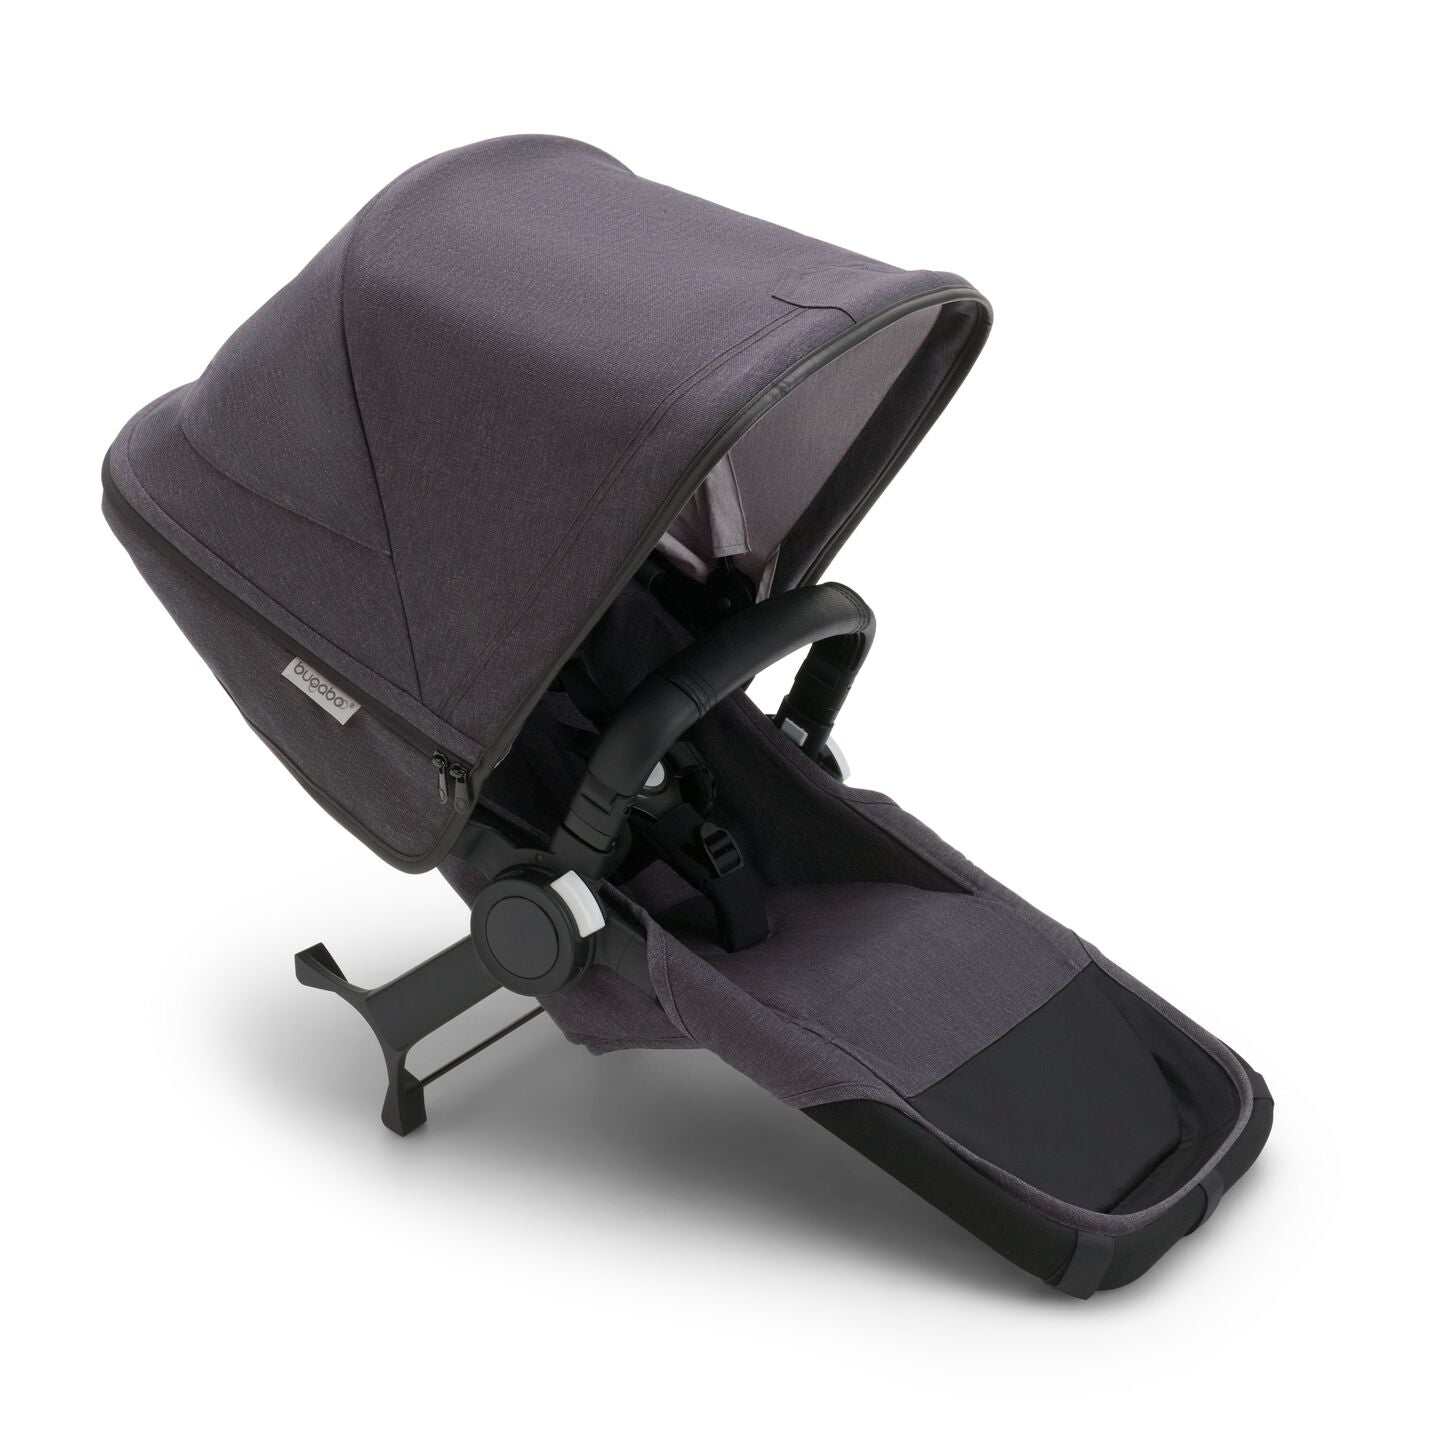 Bugaboo Donkey 5 Mineral Duo Extension - ANB Baby -8717447225966$300 - $500